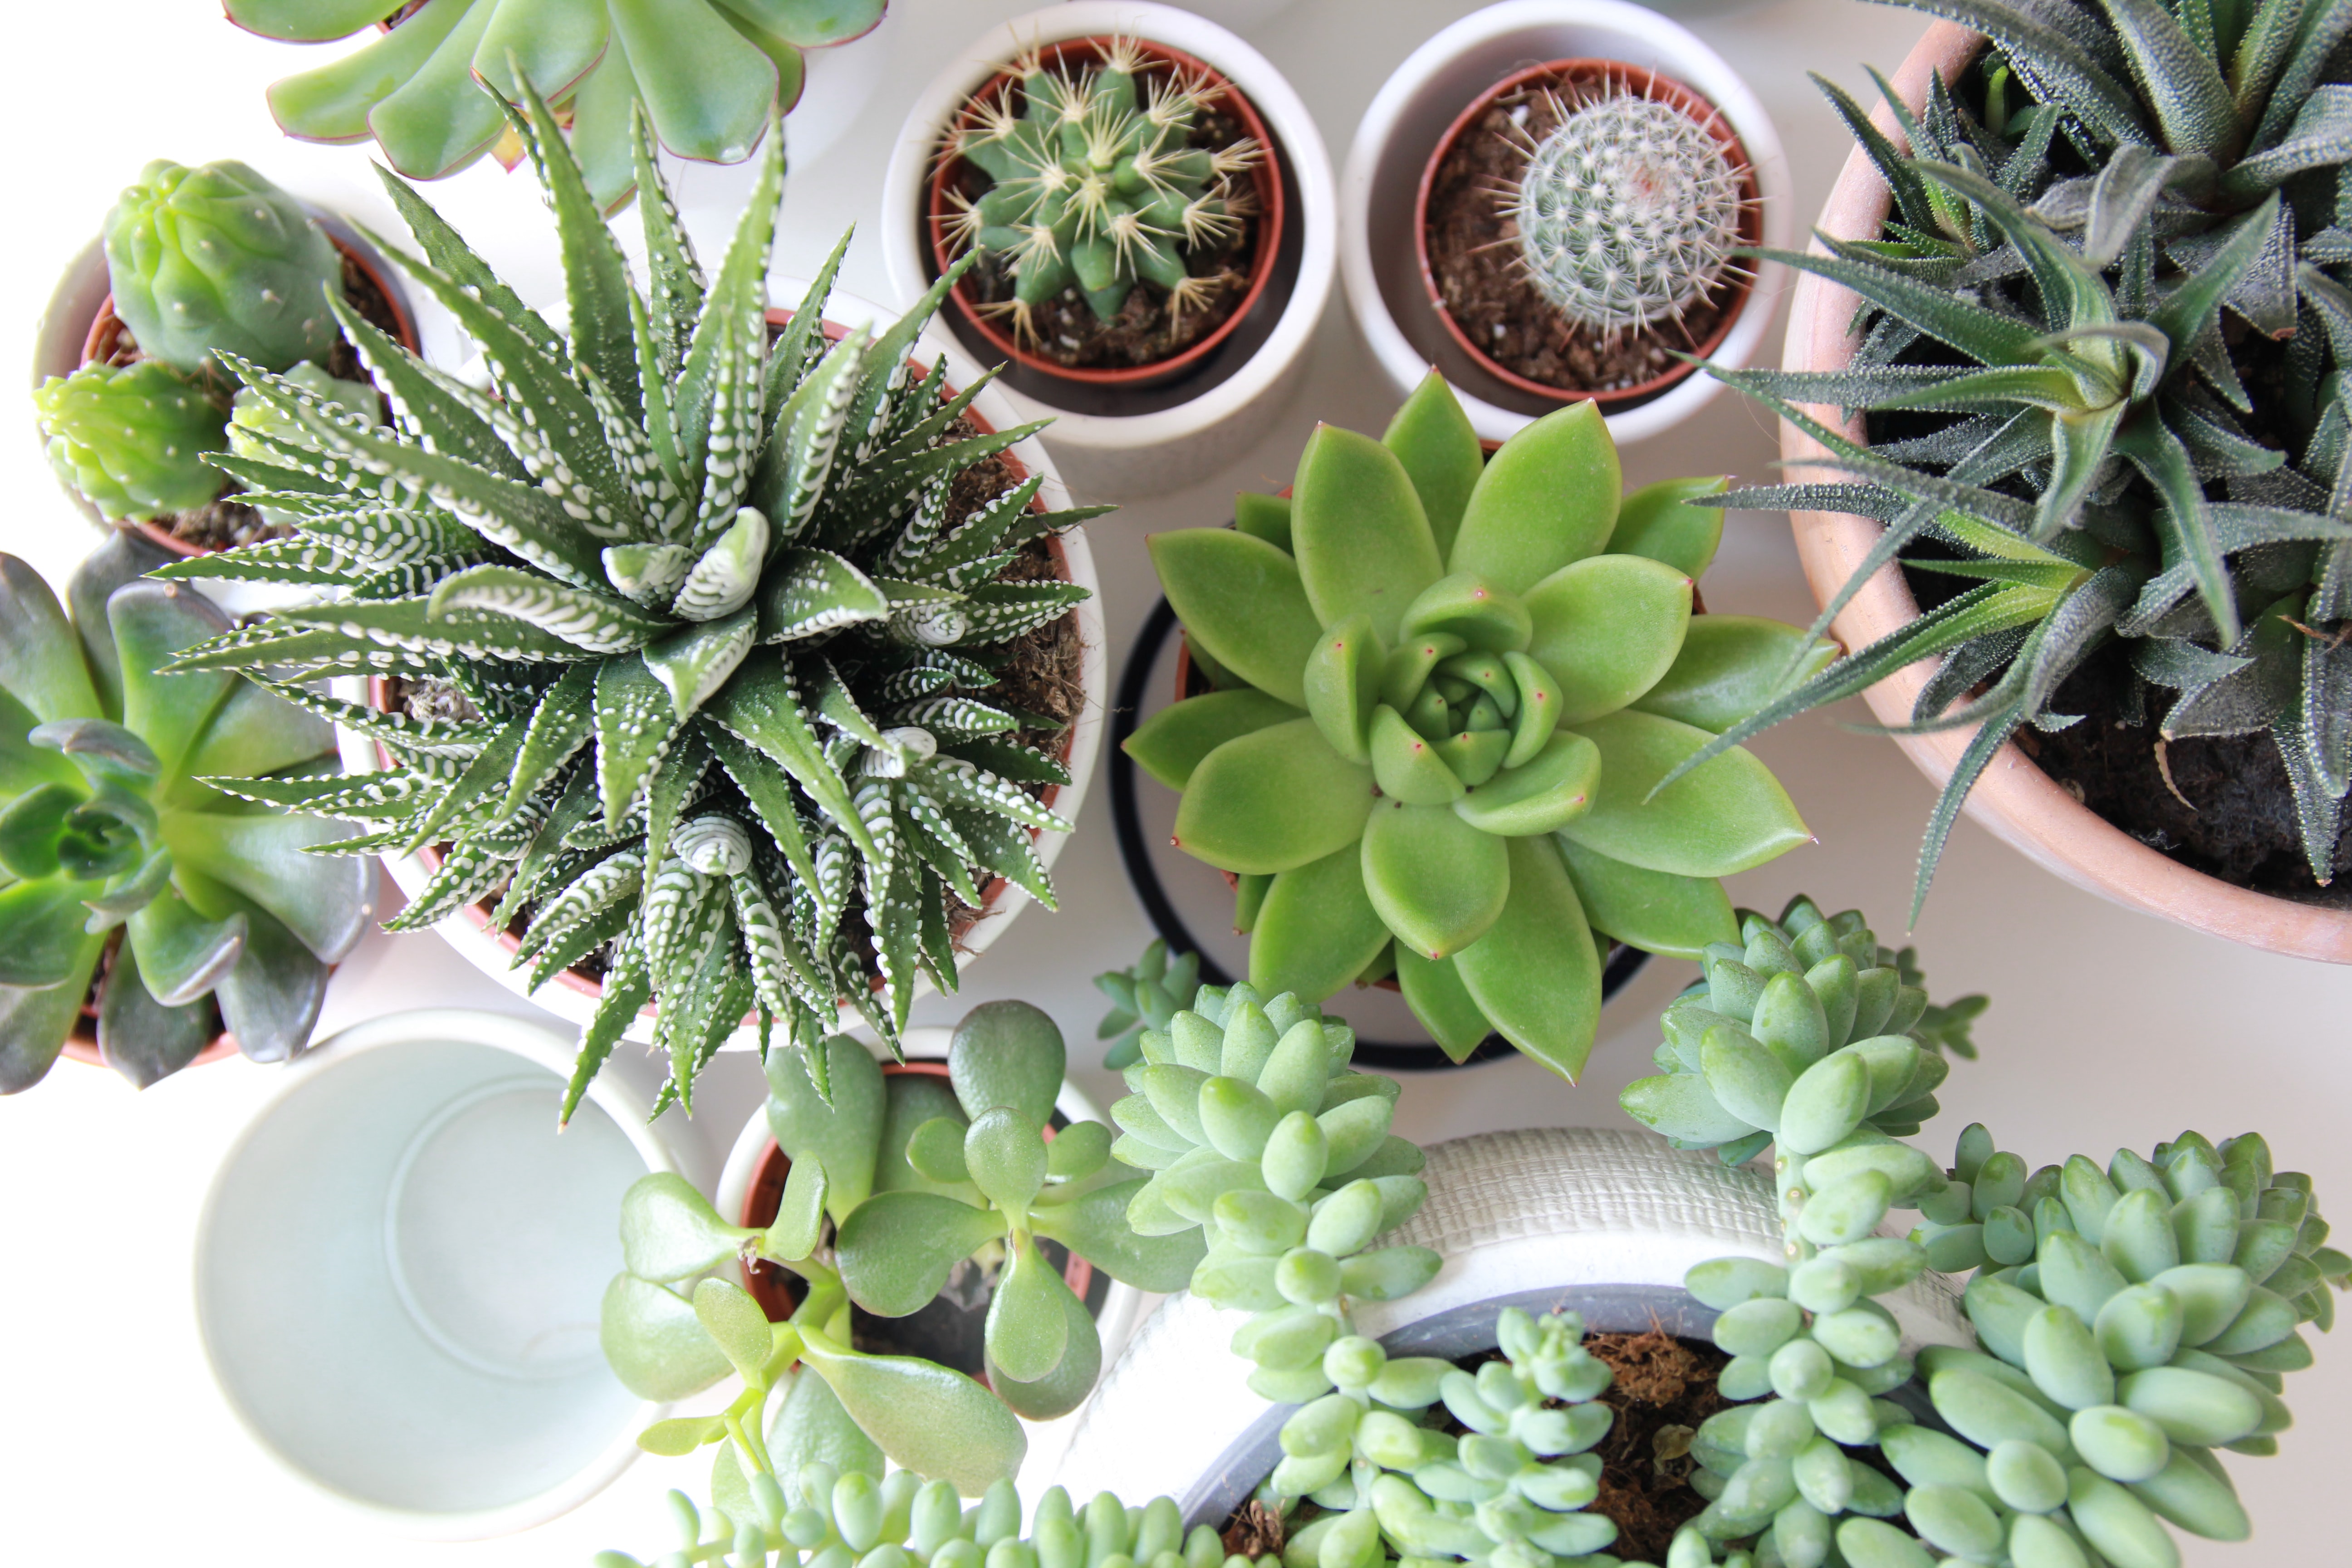 A variety of succulent plants sit on a table.